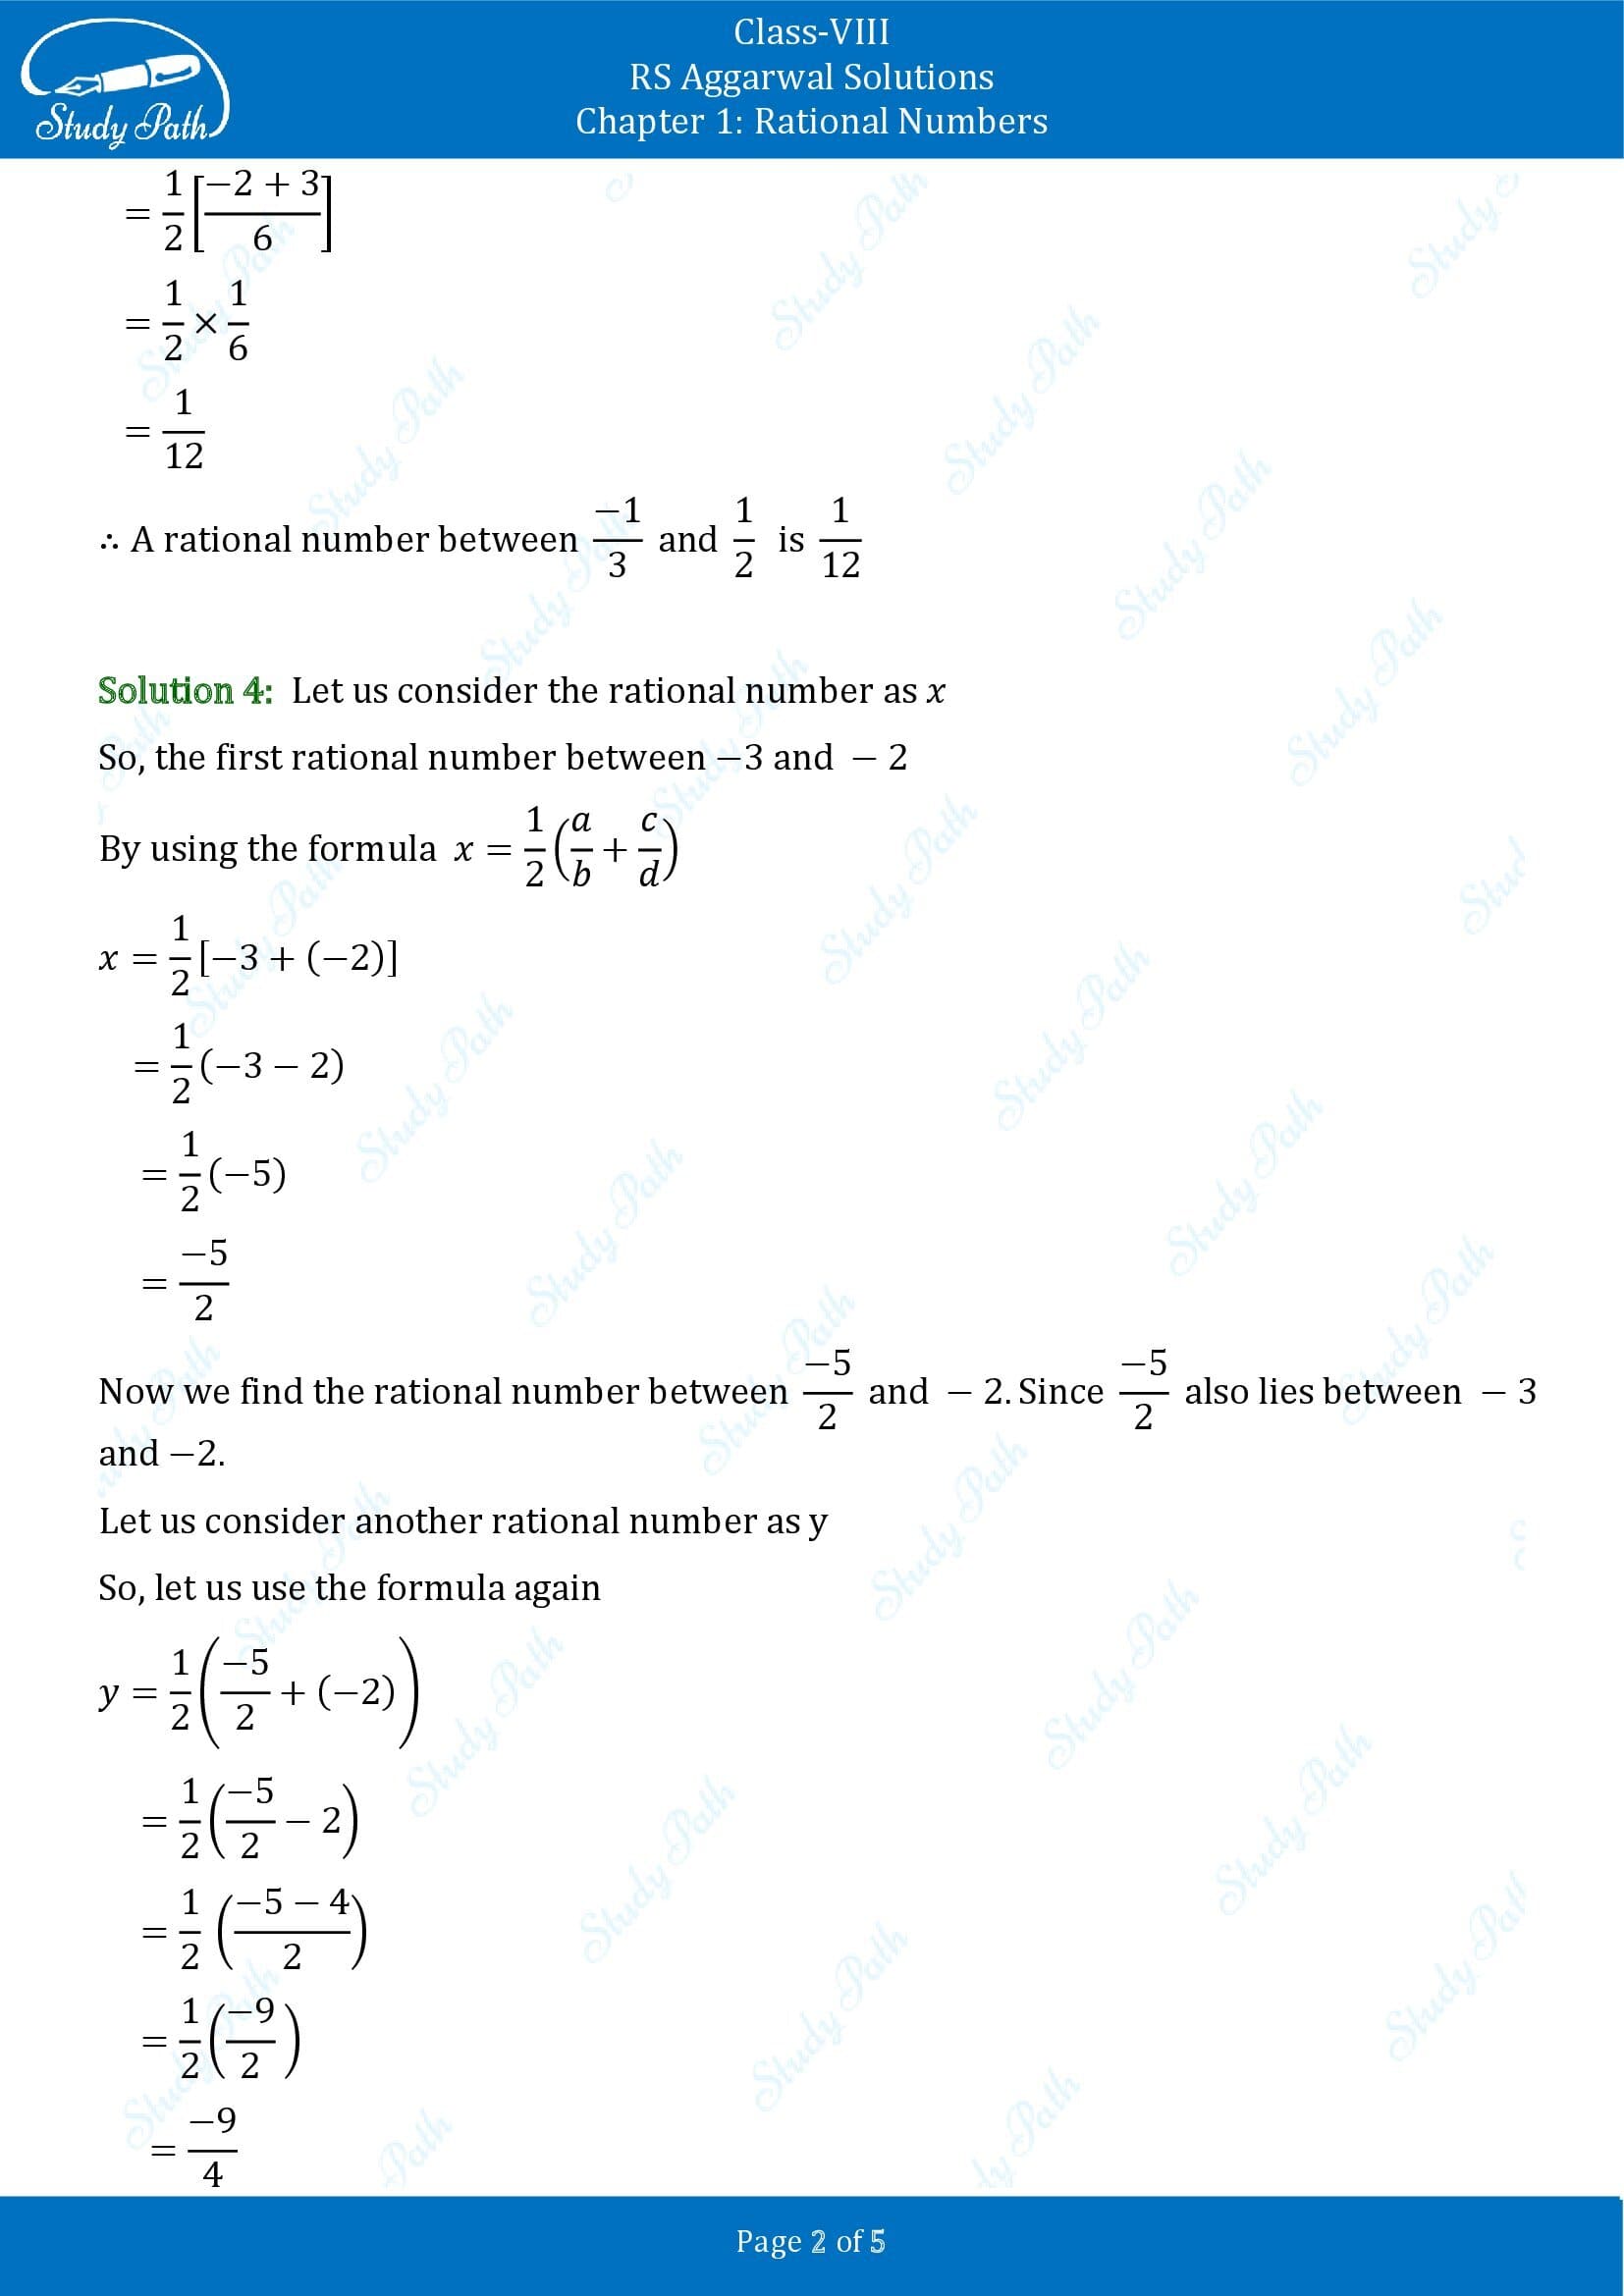 RS Aggarwal Solutions Class 8 Chapter 1 Rational Numbers Exercise 1F 00002